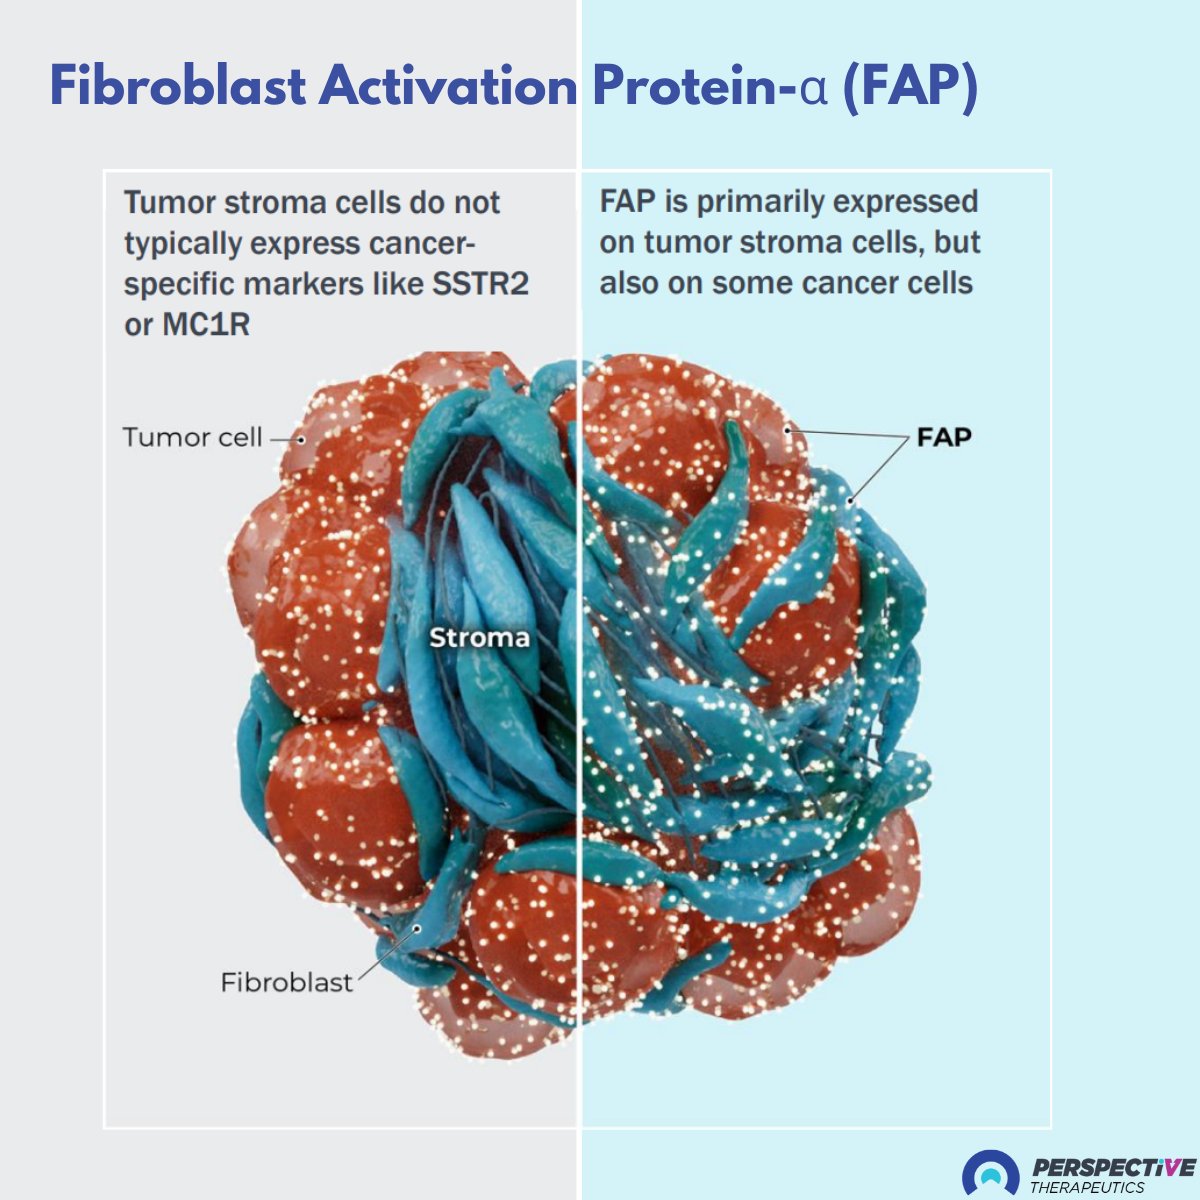 Did you know - Fibroblast Activation Protein-α (FAP) is a potential game-changer in #cancer therapy? Primarily expressed on tumor stroma cells, FAP represents a promising target across multiple cancer types. 

perspectivetherapeutics.com

#nuclearmedicine #radiopharma #oncology